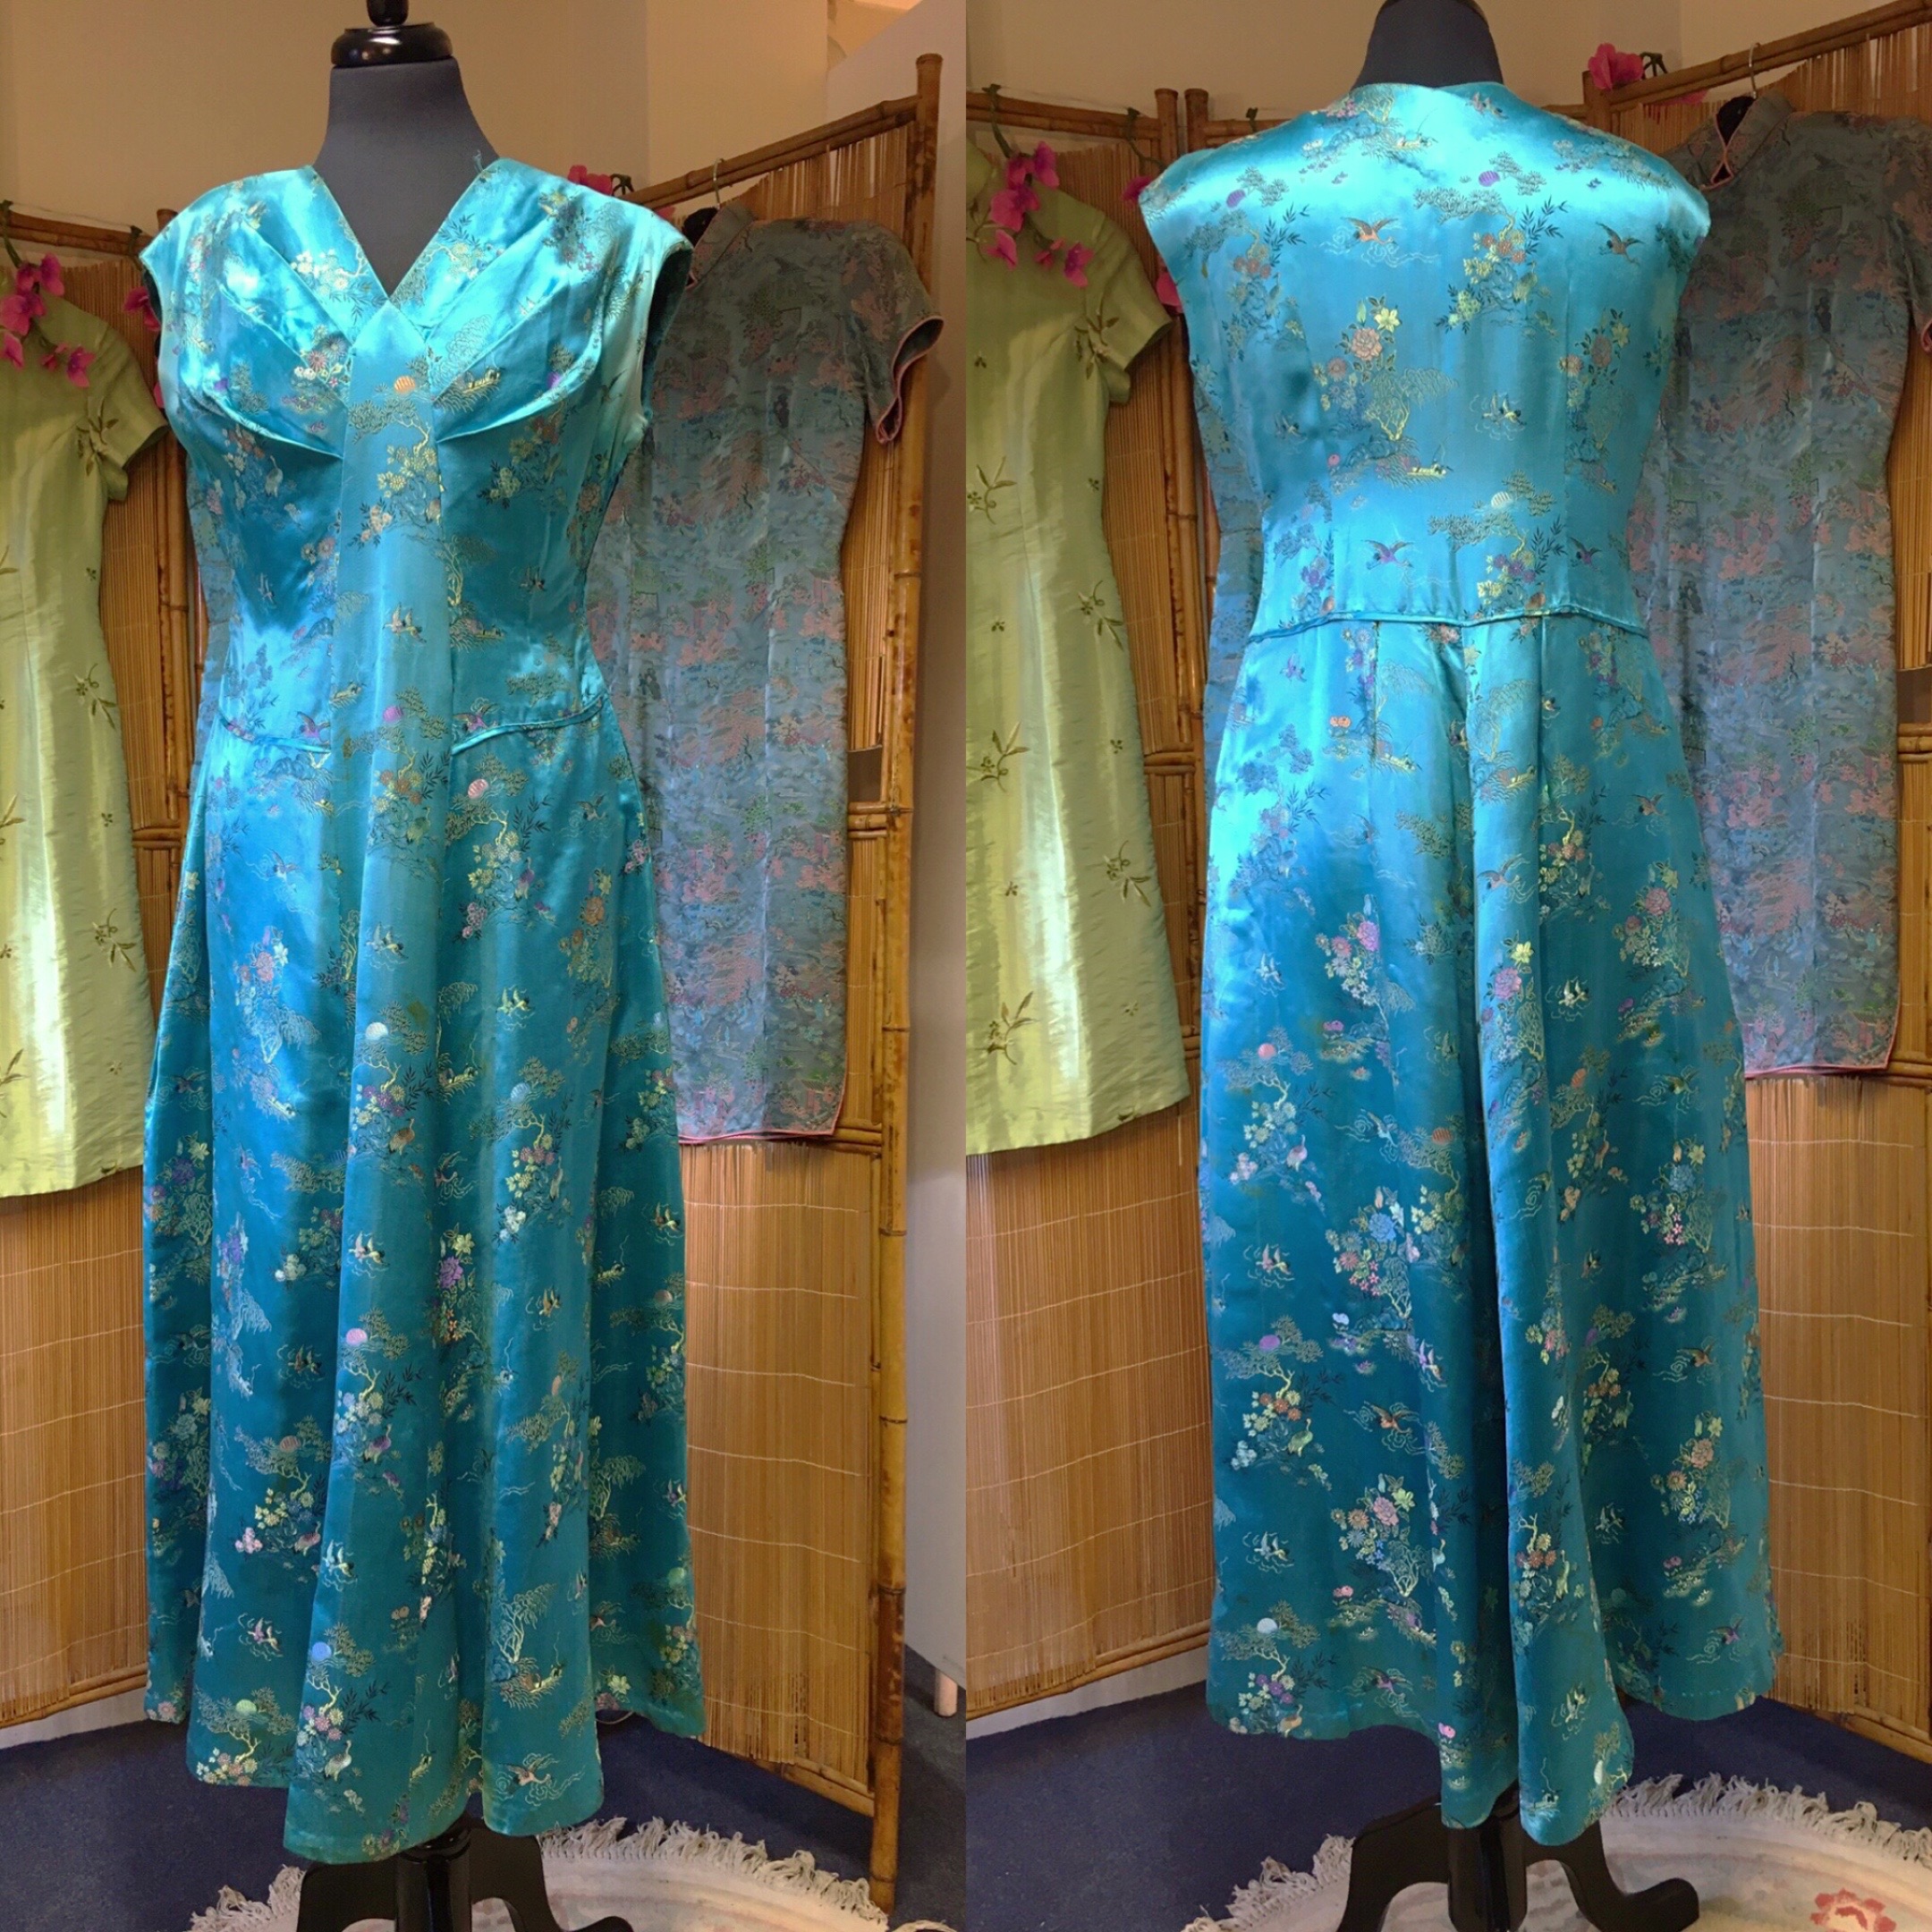 Vintage Chinese style cocktail dress | Flutterby's Boutique